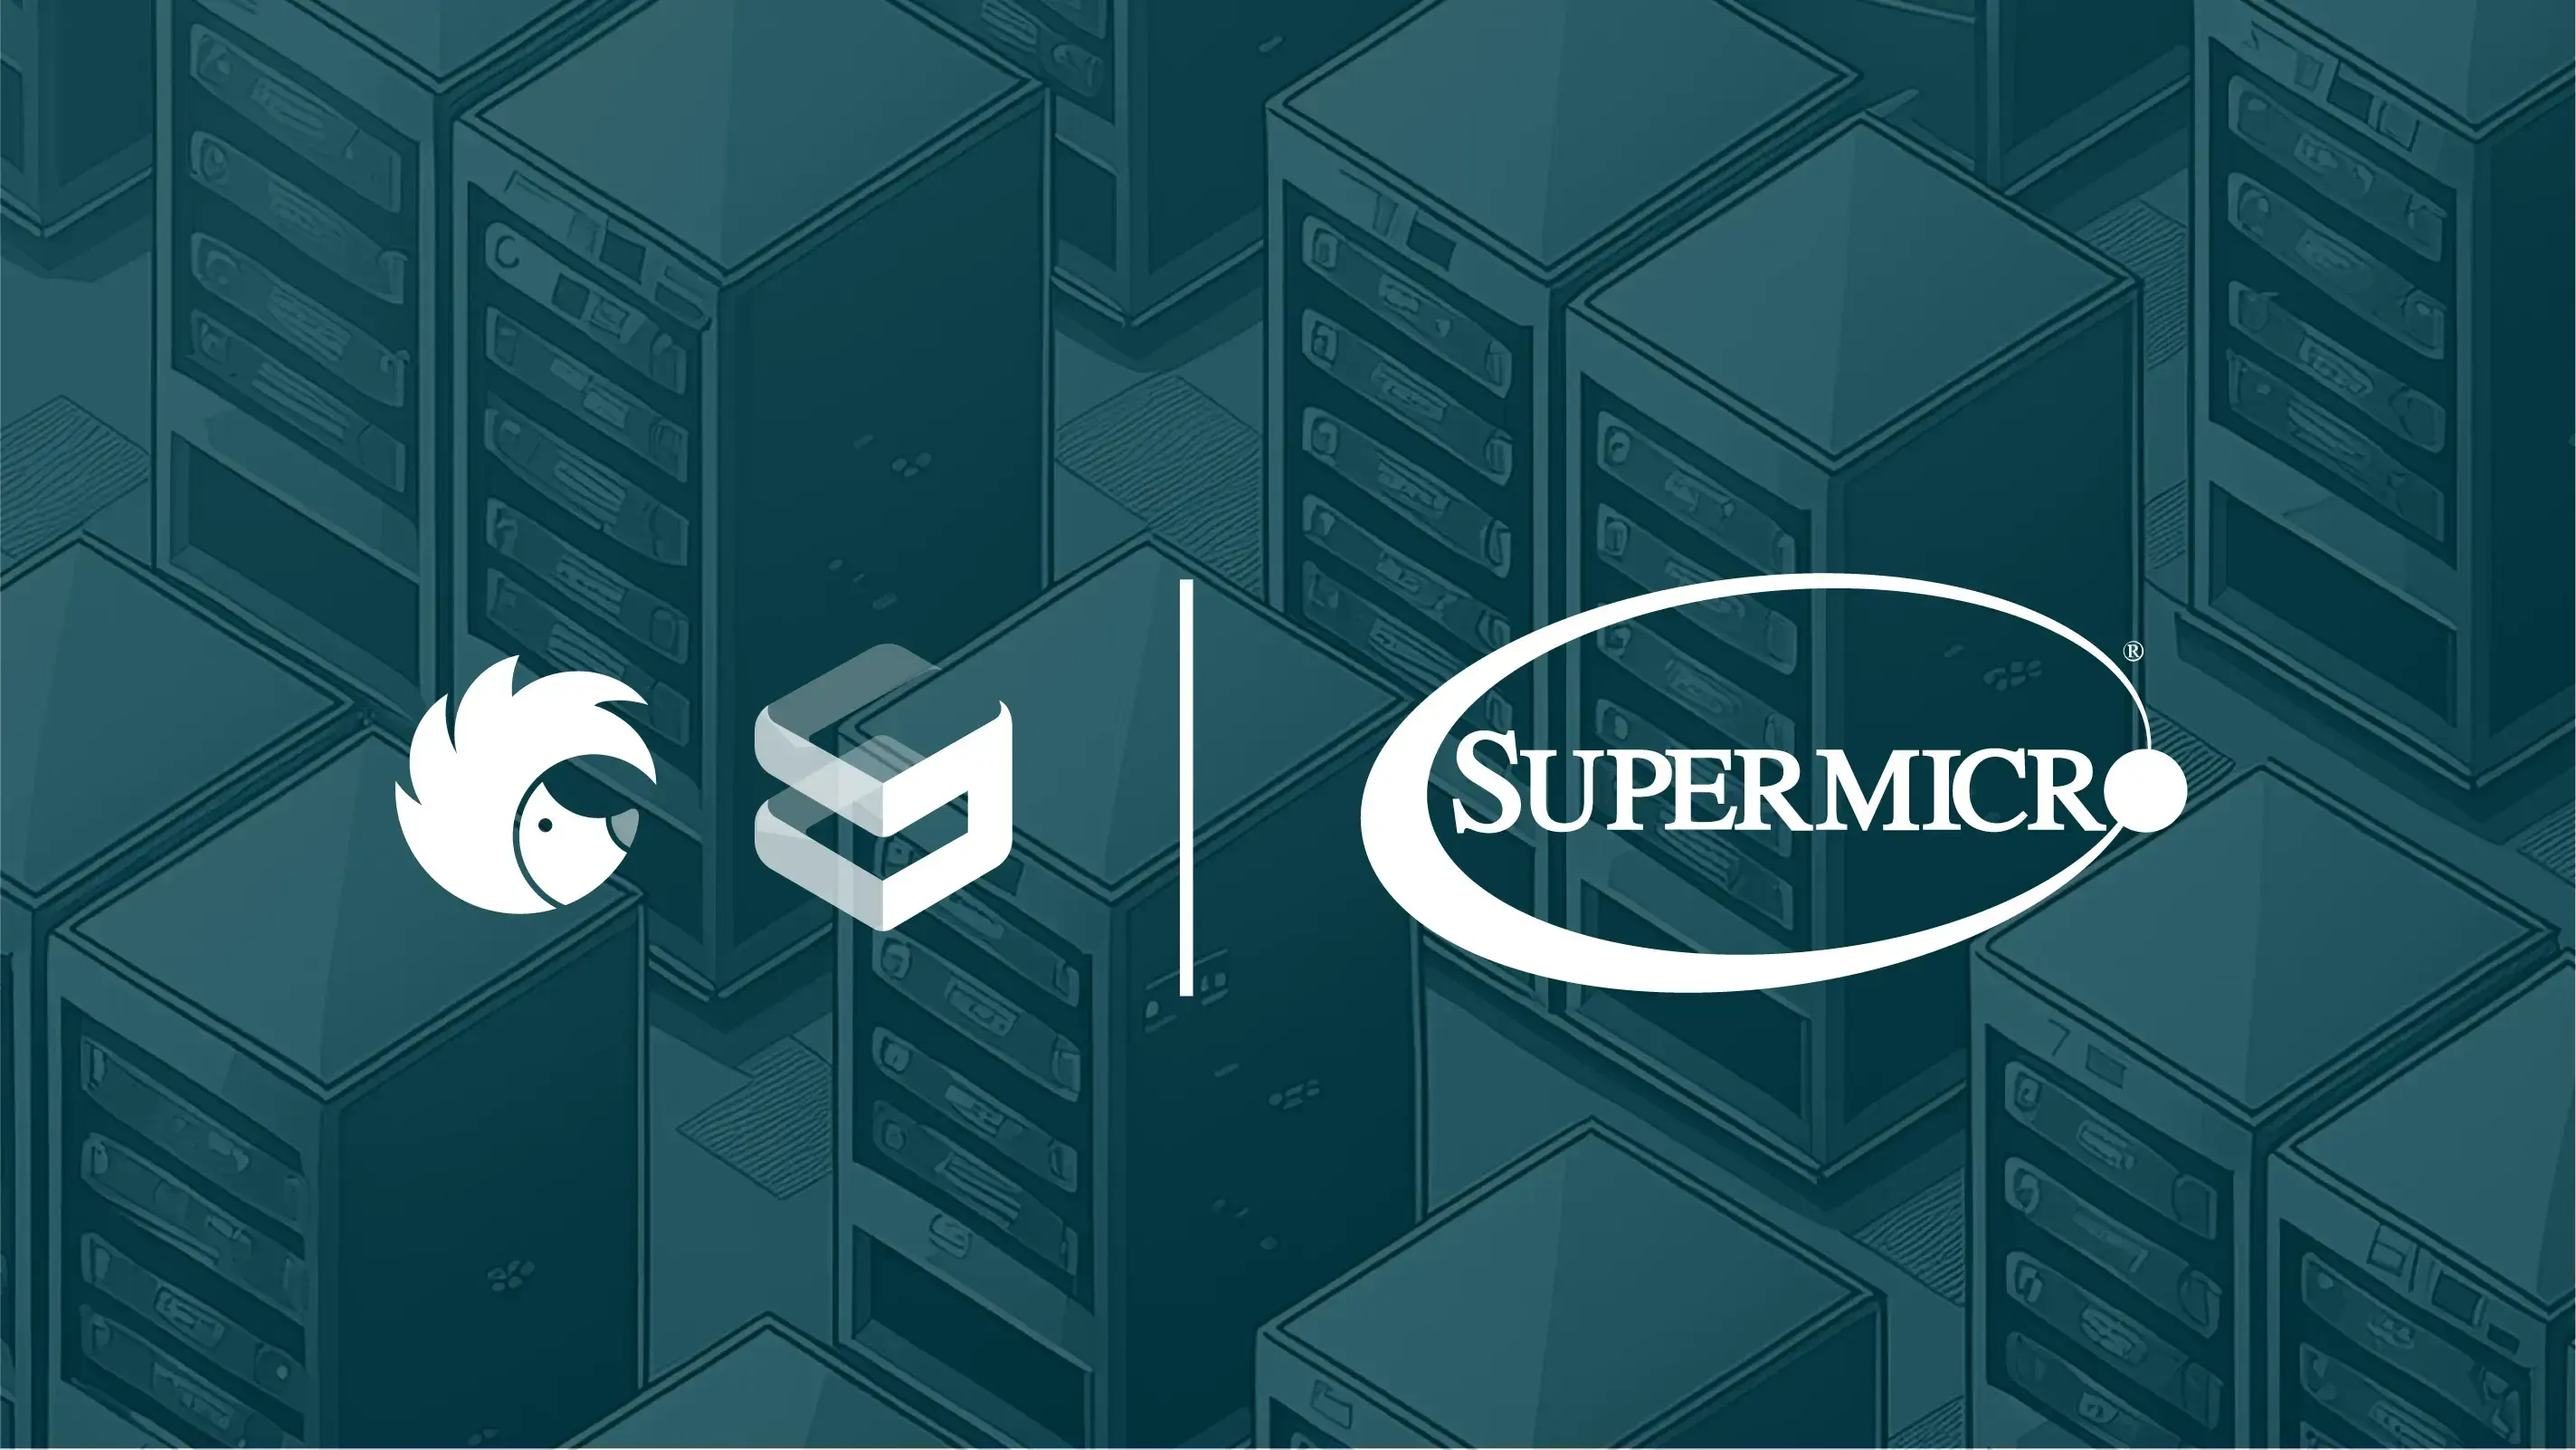 Hedgehog AI network software connects GPUs through Supermicro SSE-C4632SB switches in Supermicro Rackscale solutions for AI cloud datacenters